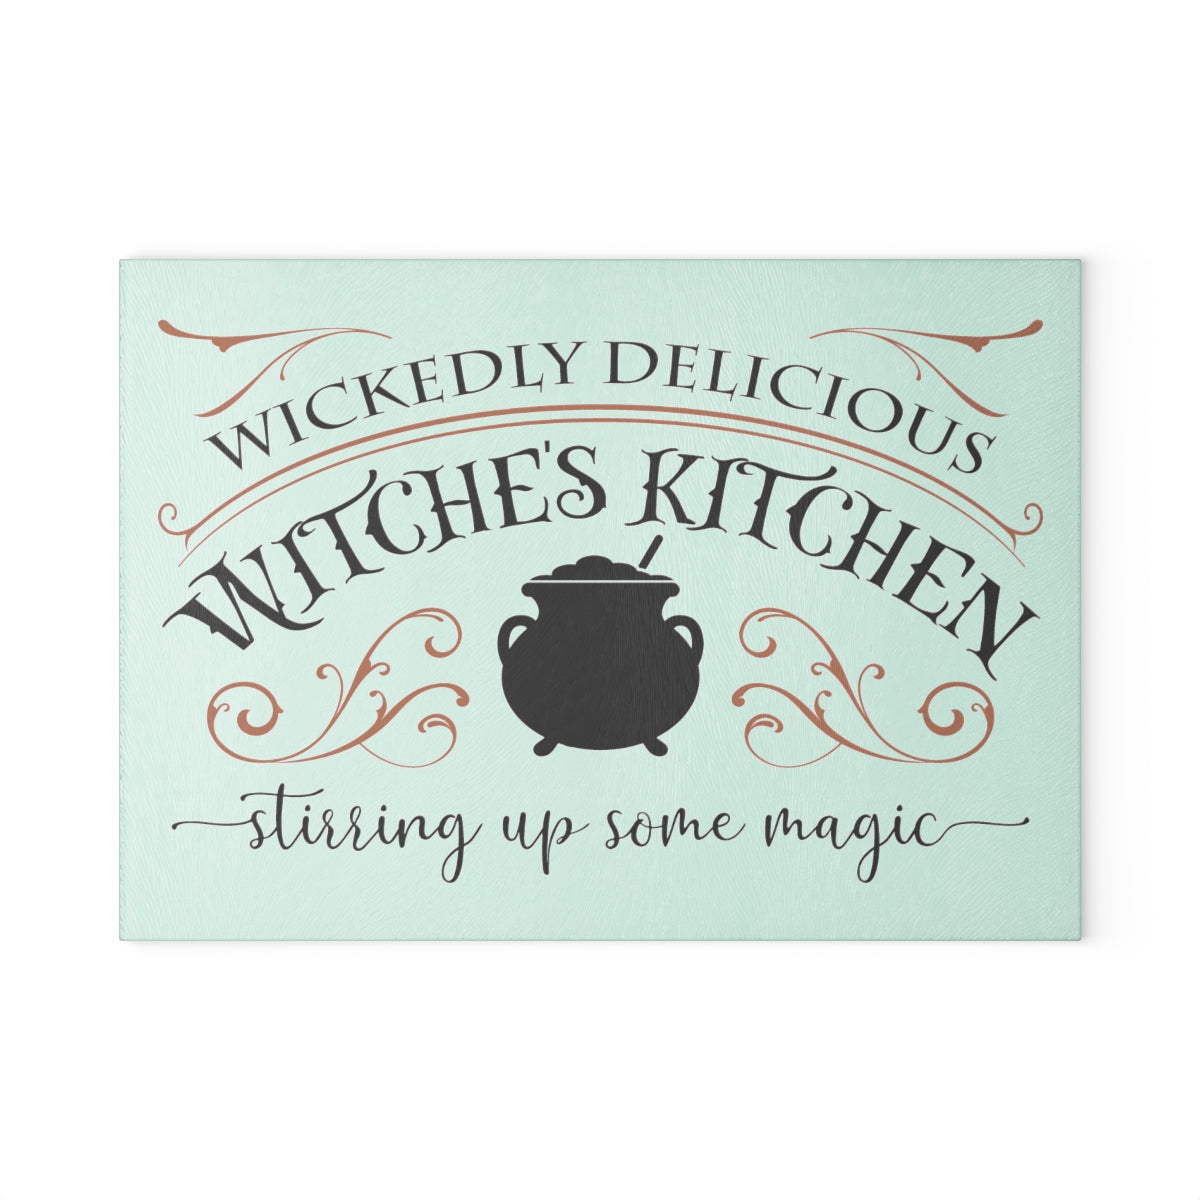 Wickedly Delicious Glass Cutting Board - Witchy Kitchens